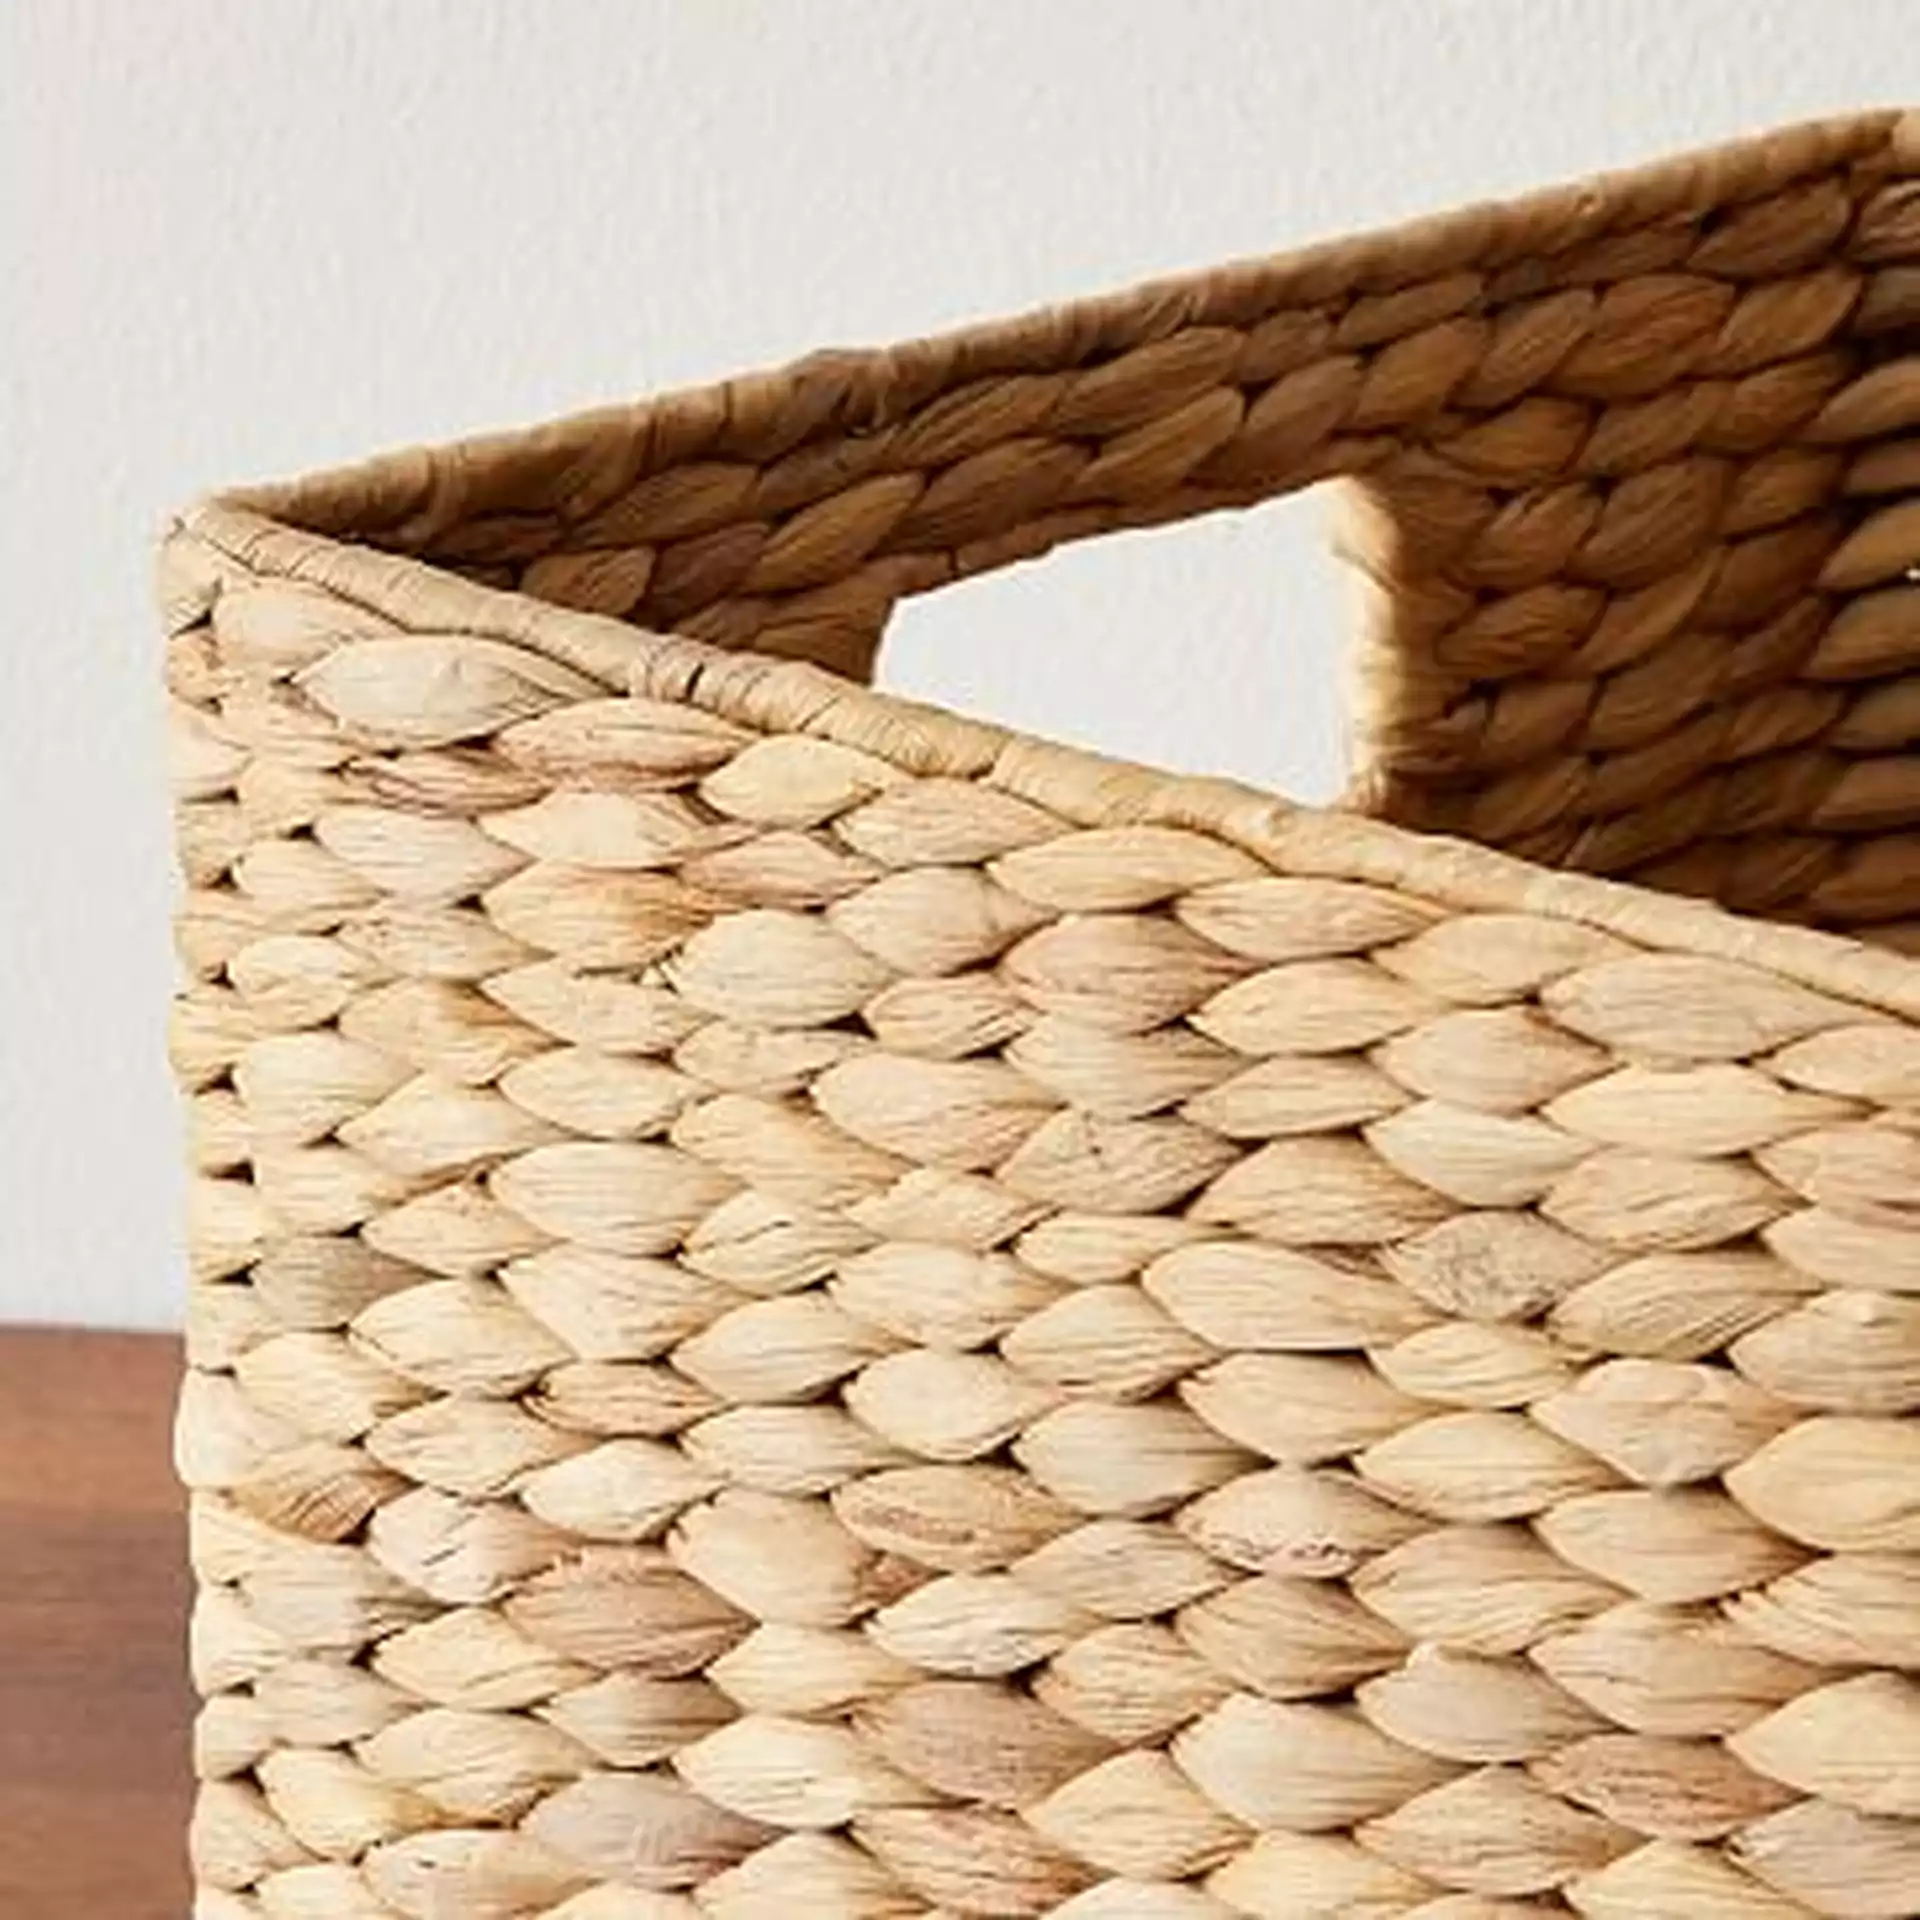 Twist Weave Basket, Large Utility, Natural, 10.5in